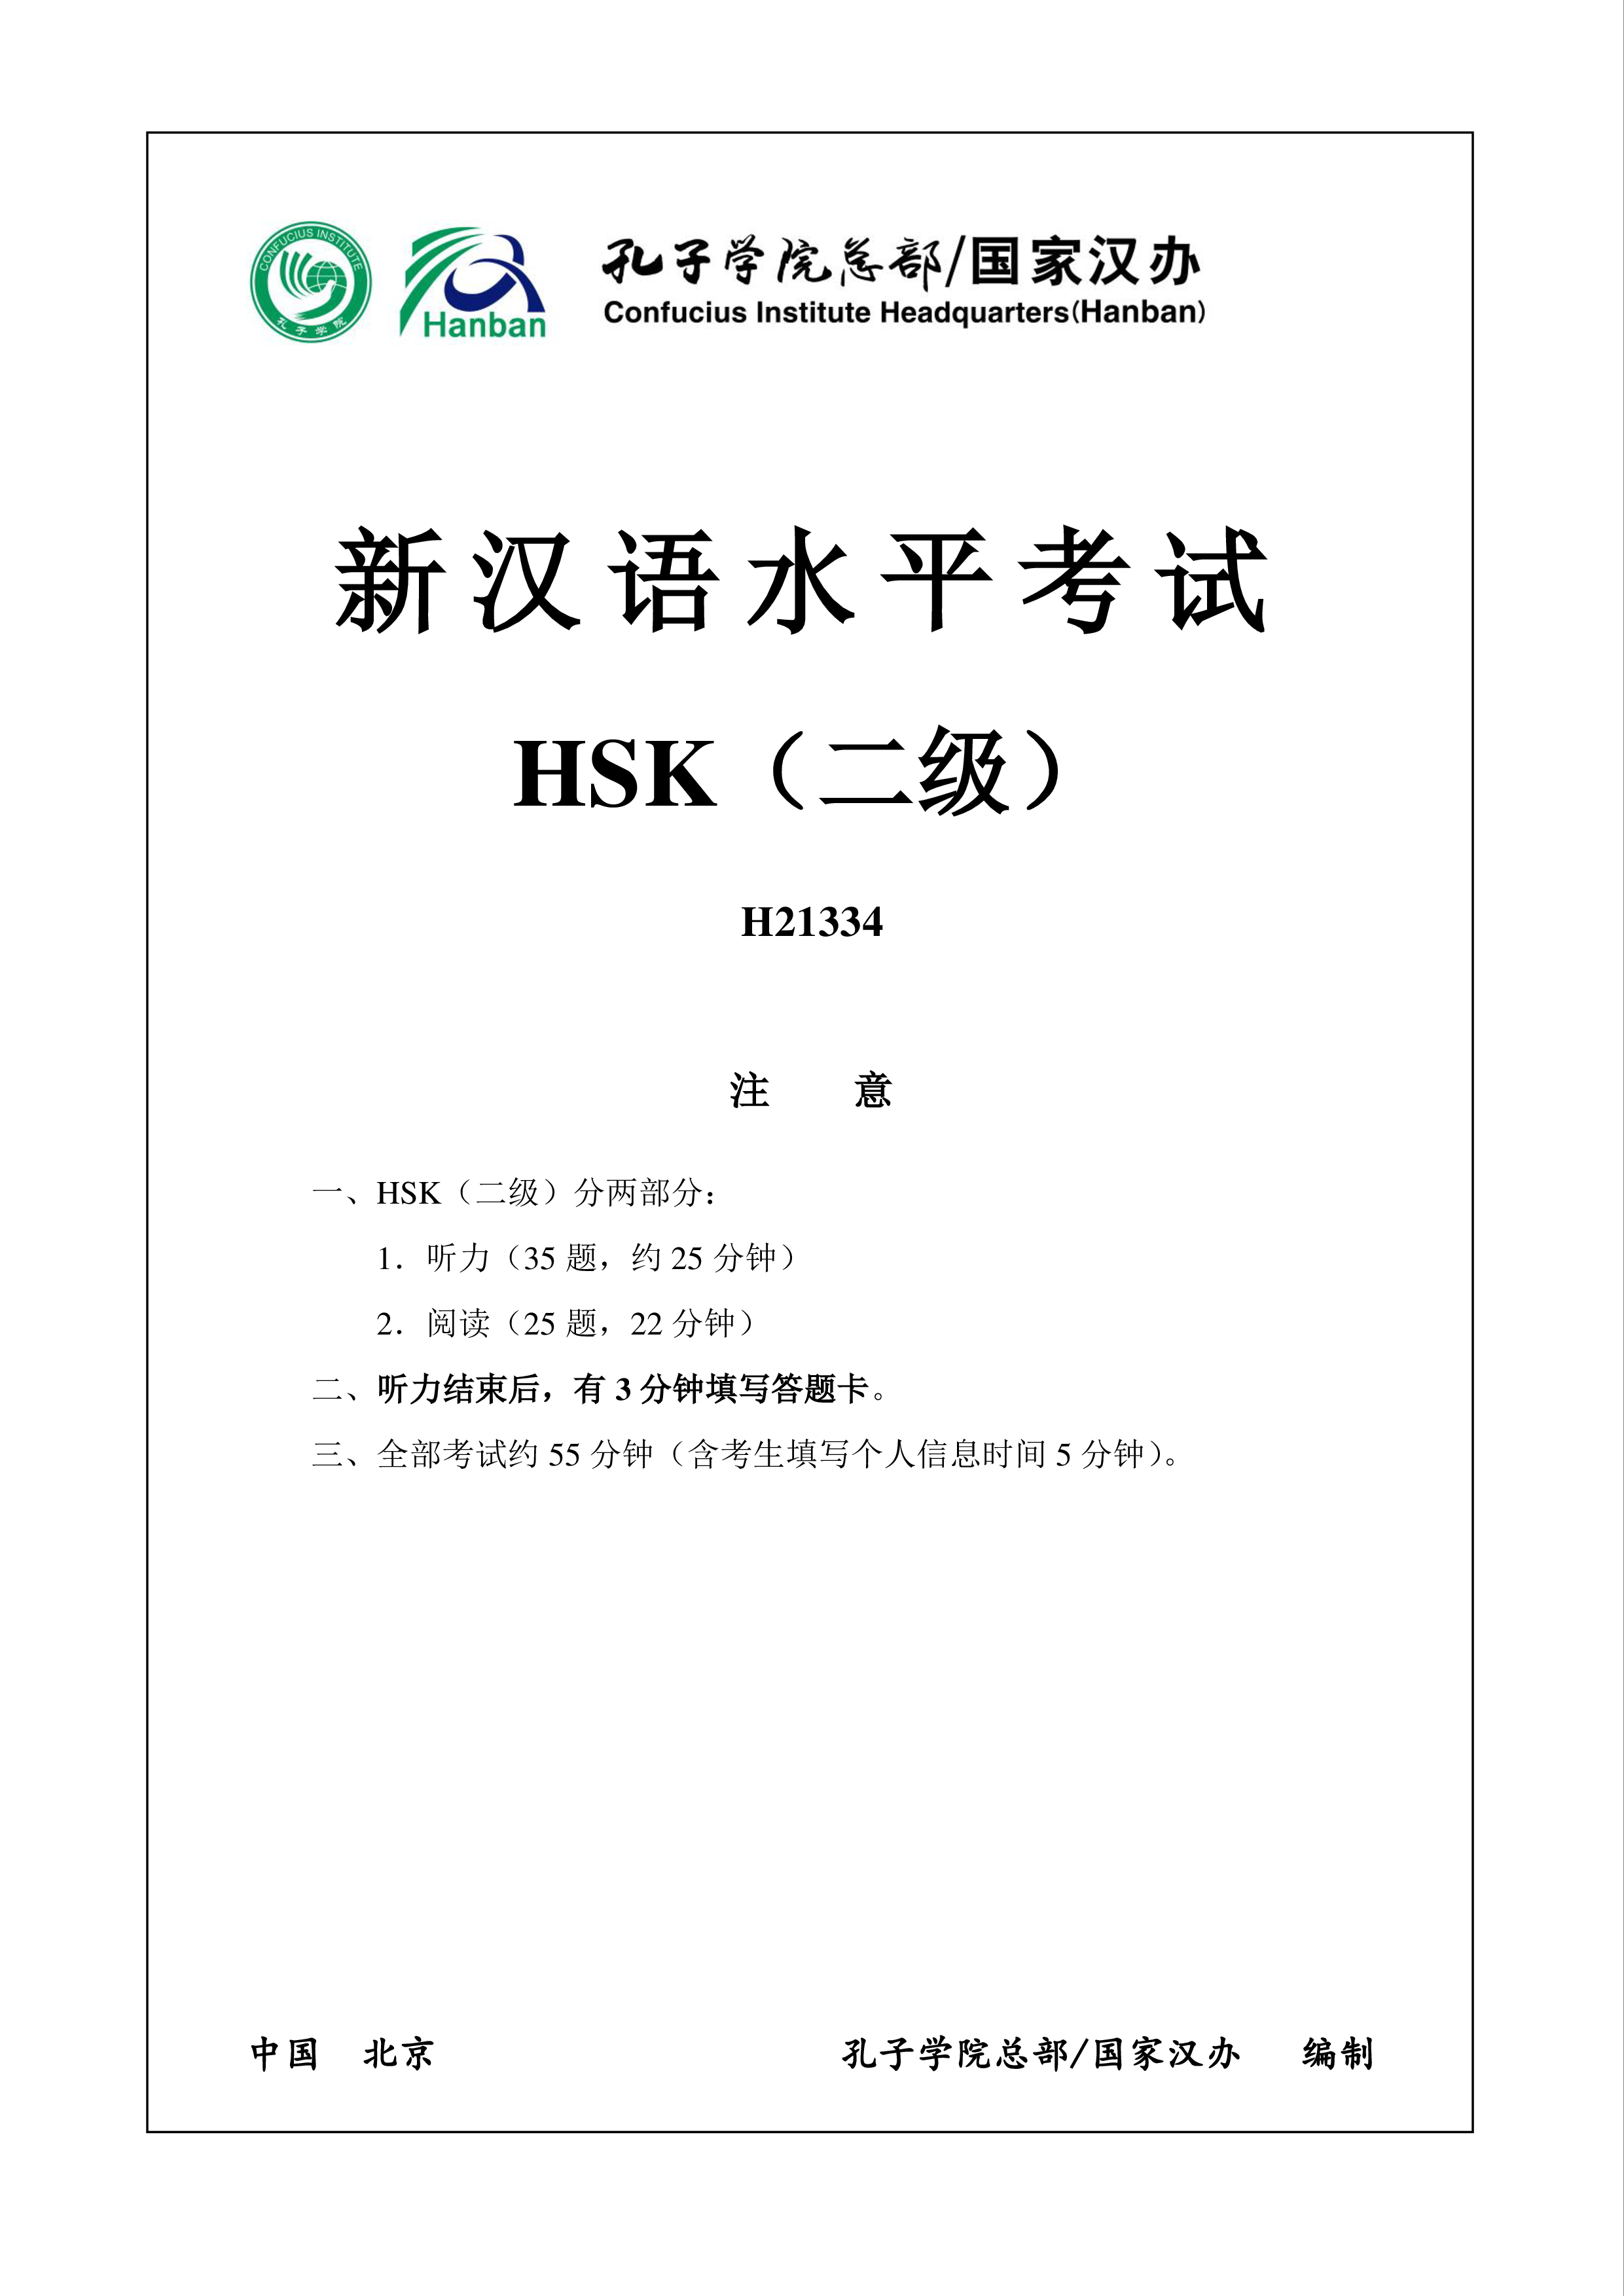 hsk2 chinese exam including answers # hsk2 h21334 template